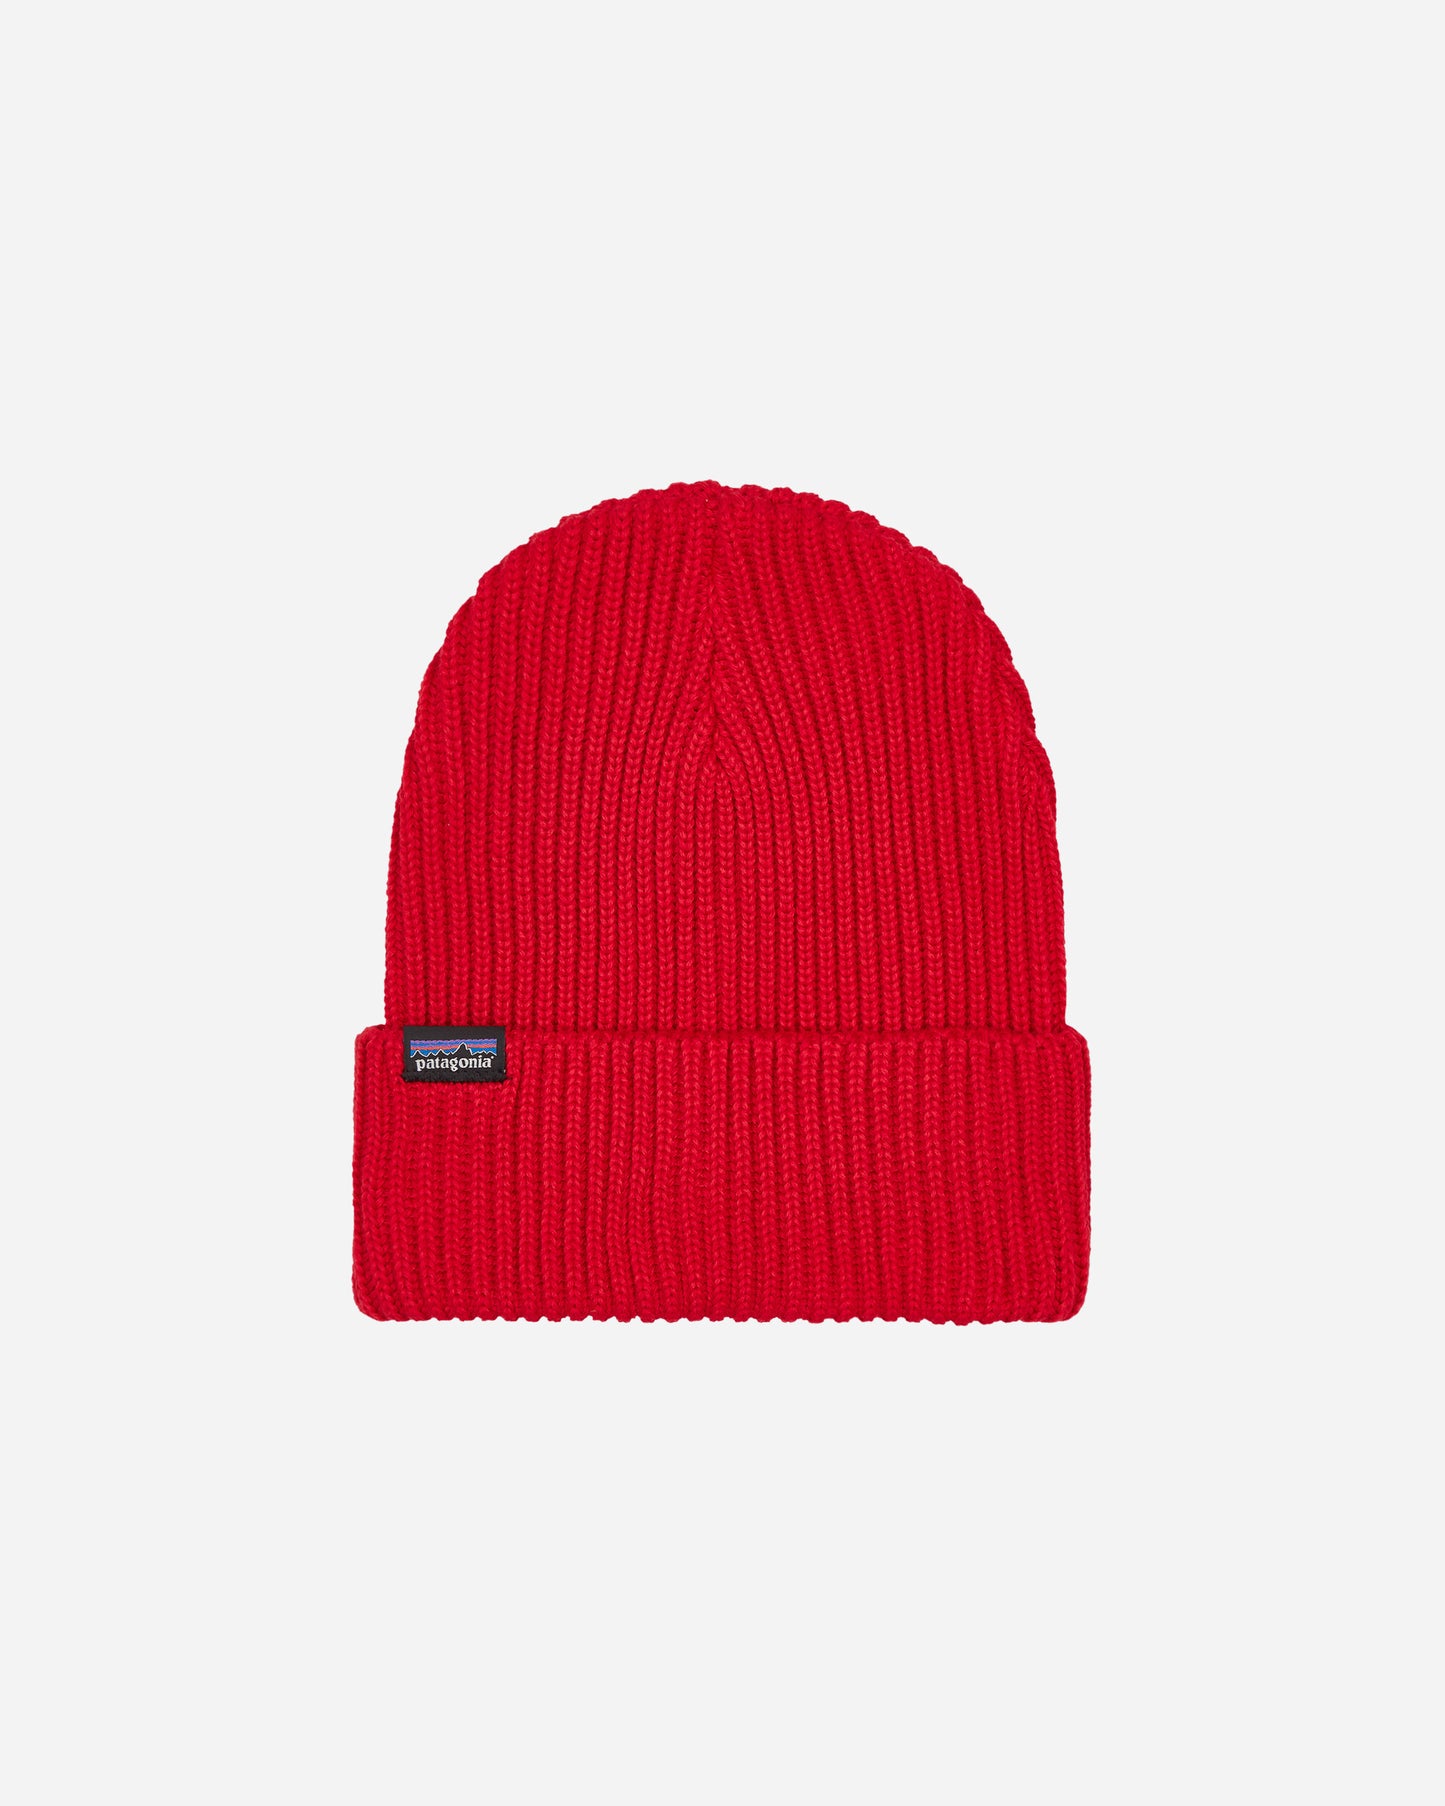 Patagonia Fishermans Rolled Beanie Touring Red Hats Beanies 29105 TGRD